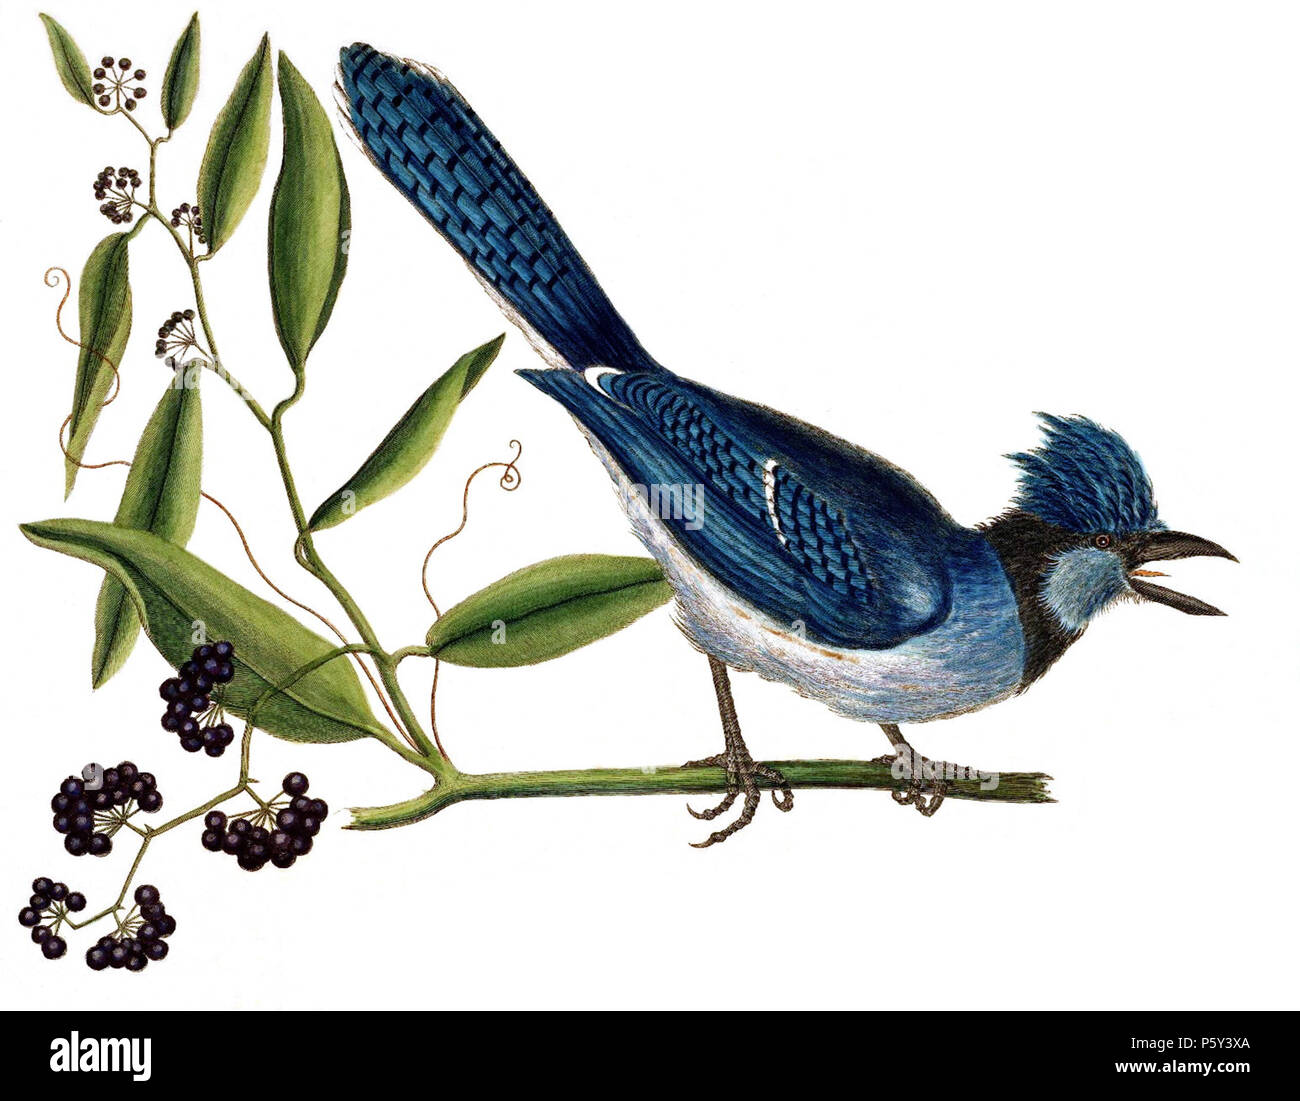 N/A. English: Blue Jay, Cyanocitta cristata and laurel greenbrier, Smilax laurifolia. Hand-colored engraving. Original caption (cropped off here) reads: Pica glandaria caerulea cristata: The Blue Jay; Smilax laevis Lauri folio baccis nigris: The Bay-Leaved Smilax . 1754. Catesby, Mark (1683-1749), and Edwards, George (1694-1773) 395 Cyanocitta cristataCatesbyV1P015AA Stock Photo